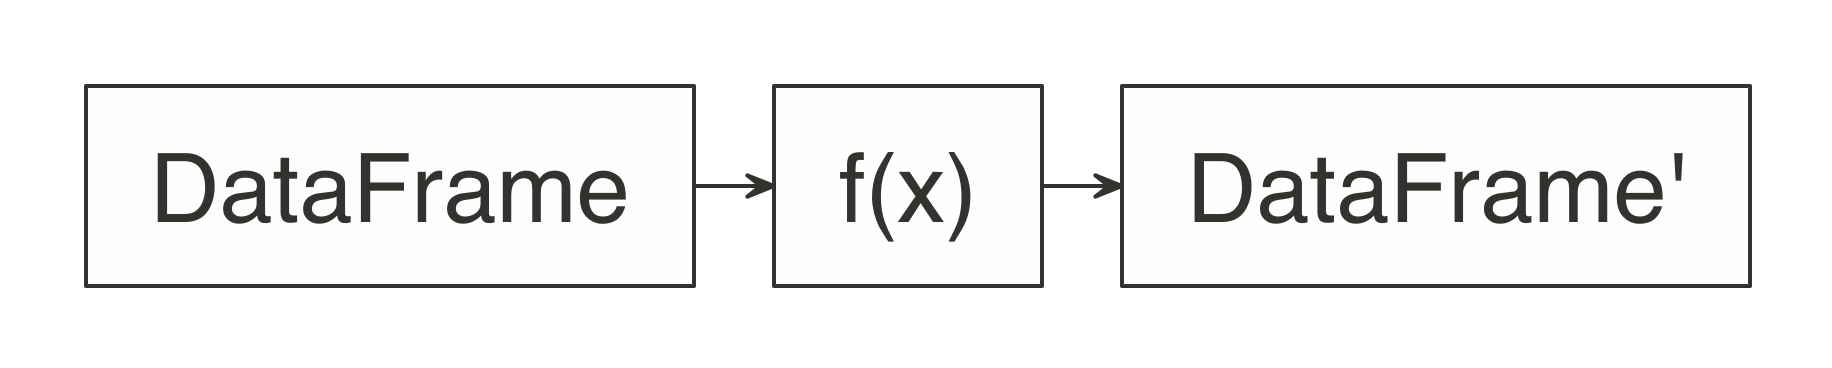 Expected function signature in spark_apply() mappings